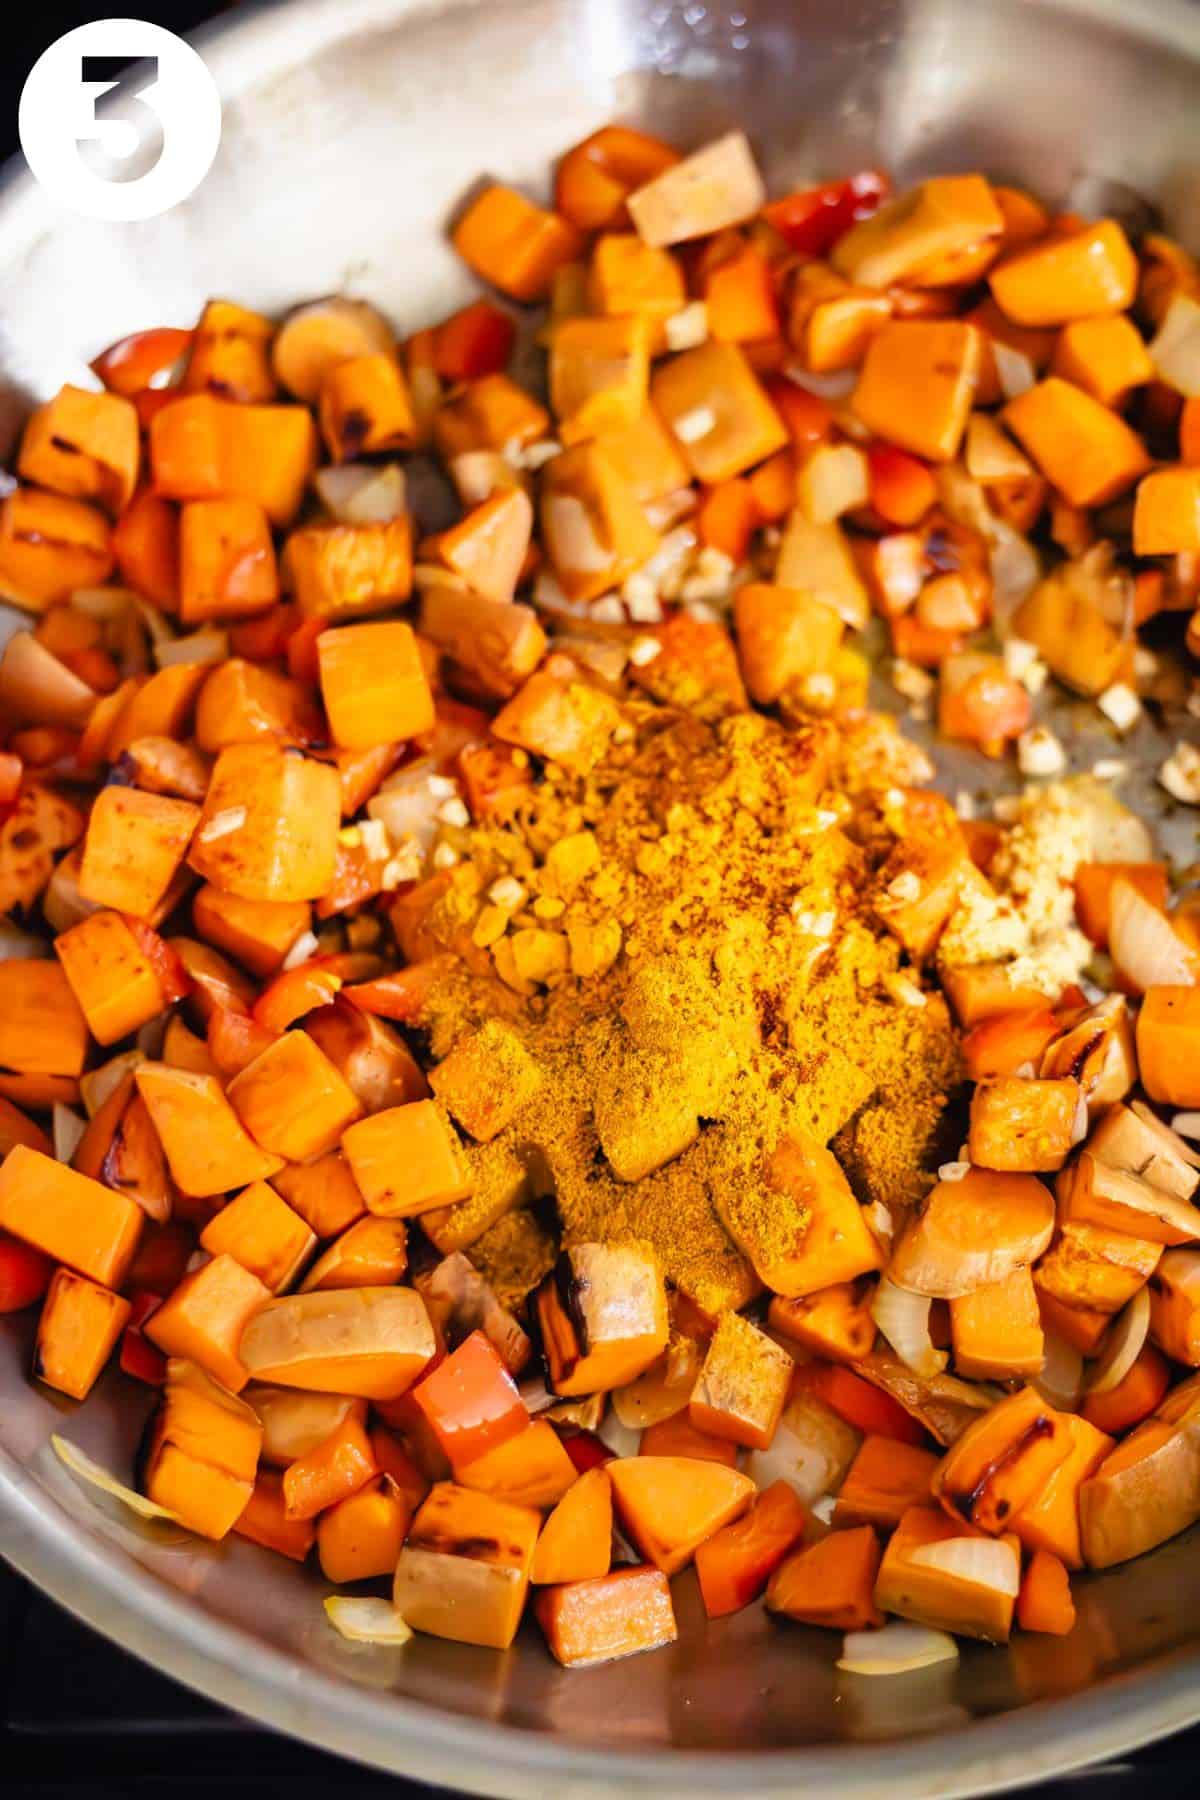 Ground spices, garlic, and ginger are sitting on top of a skillet with cubed sweet potato and diced onion and red bell pepper. The photo is labeled with a number "3."